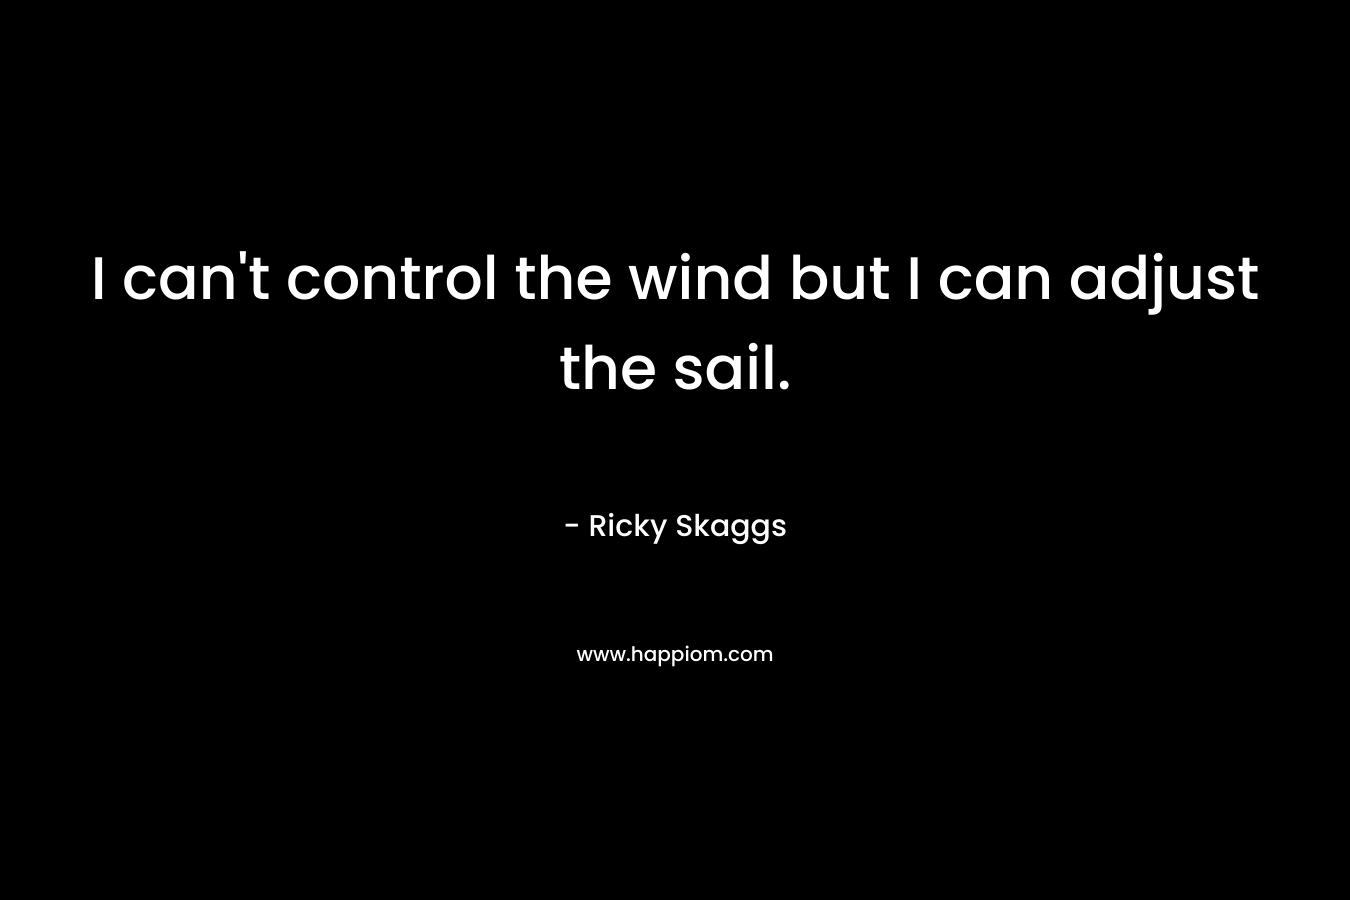 I can't control the wind but I can adjust the sail.